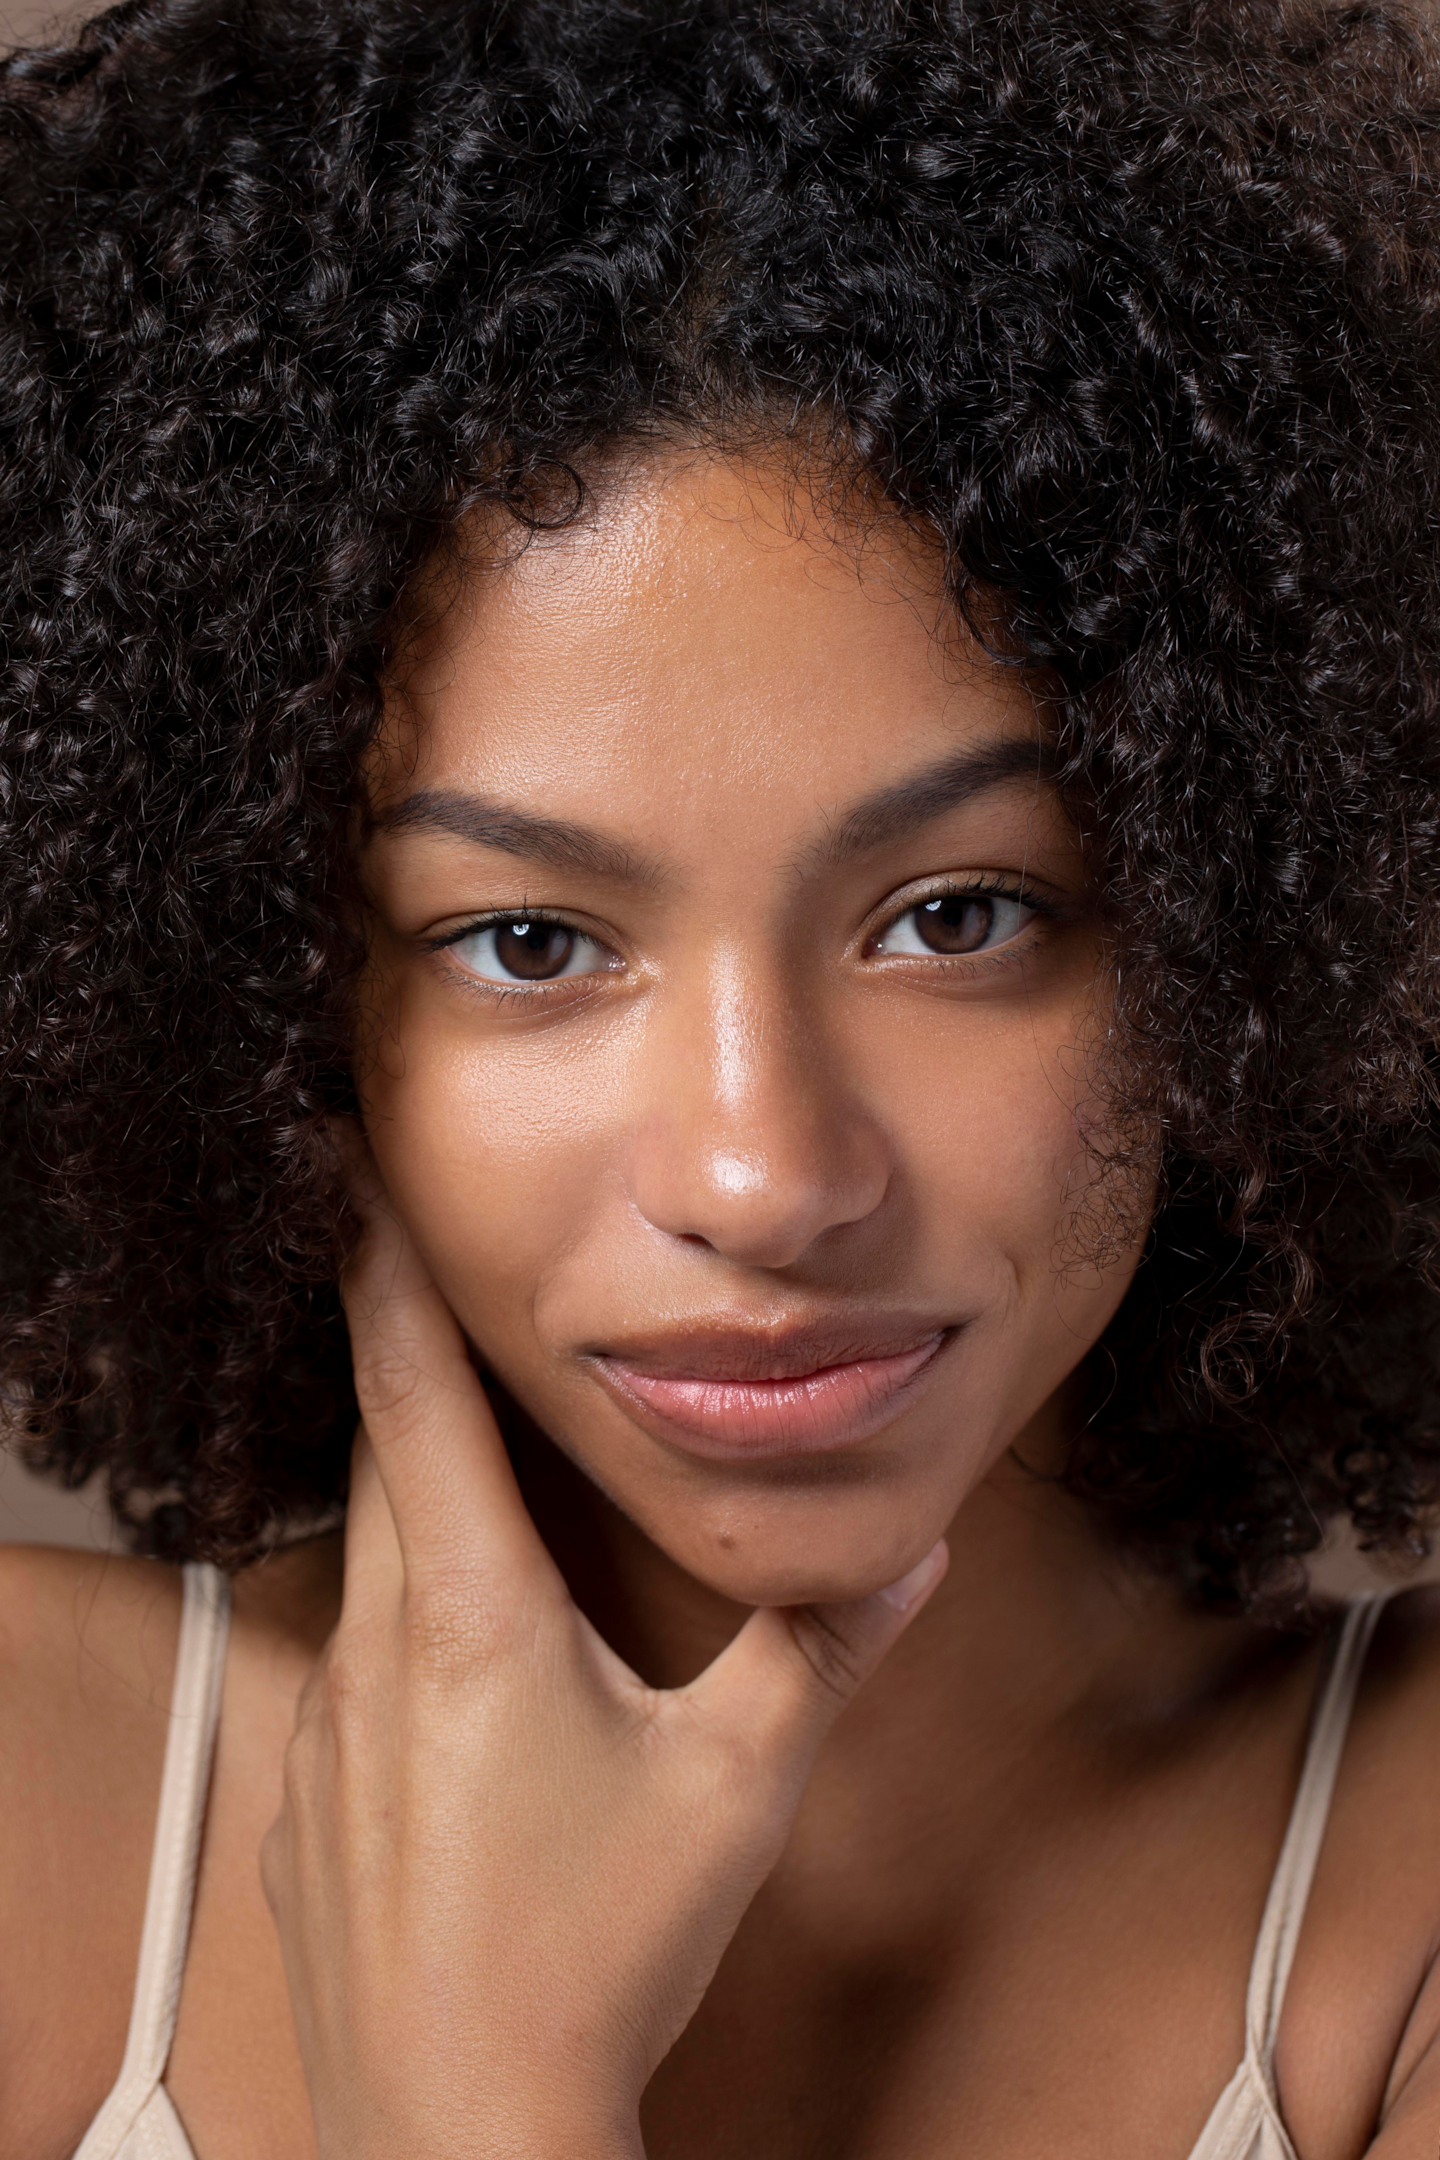 melanin and aging, skin cancer, the darker your skin, aging skin